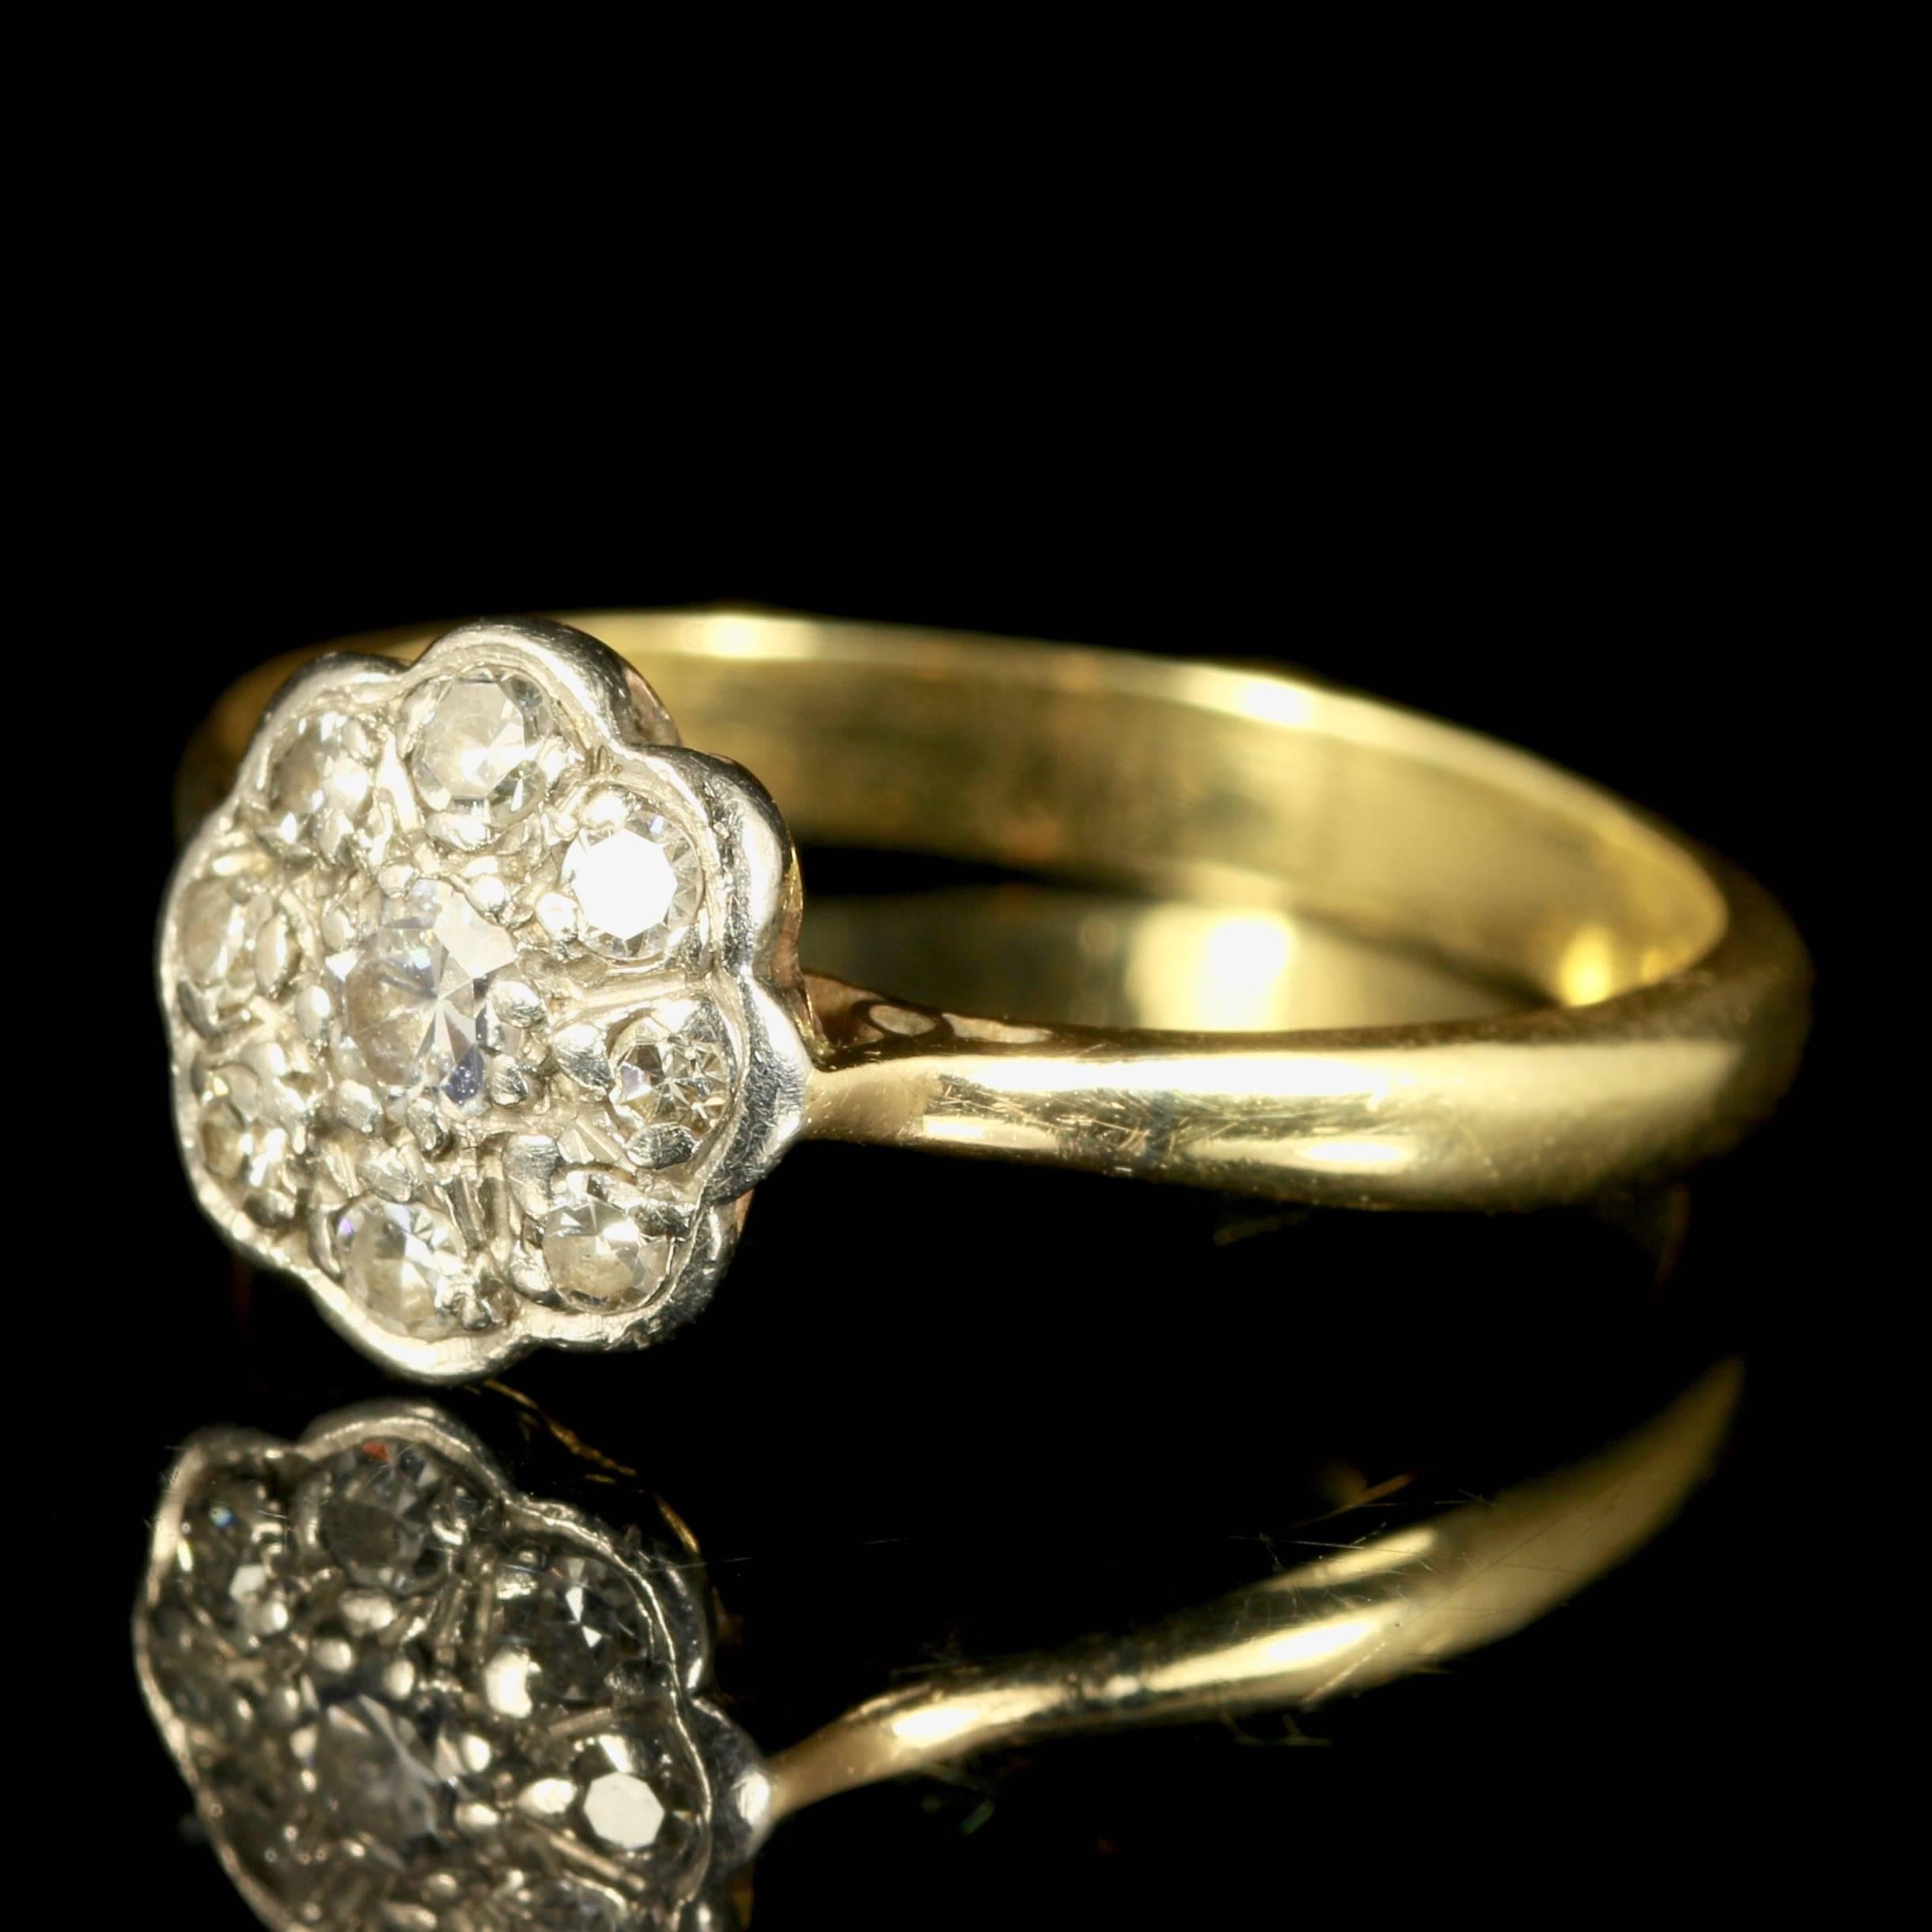 This stunning Edwardian rose cut diamond cluster ring is set with 0.50ct of old cut diamonds.

Hallmarked 18ct set in 18ct yellow gold and platinum. 

The centre diamond is 0.10ct with 0.05ct chasing around the gallery.

The diamonds are SI 1/2 H/I